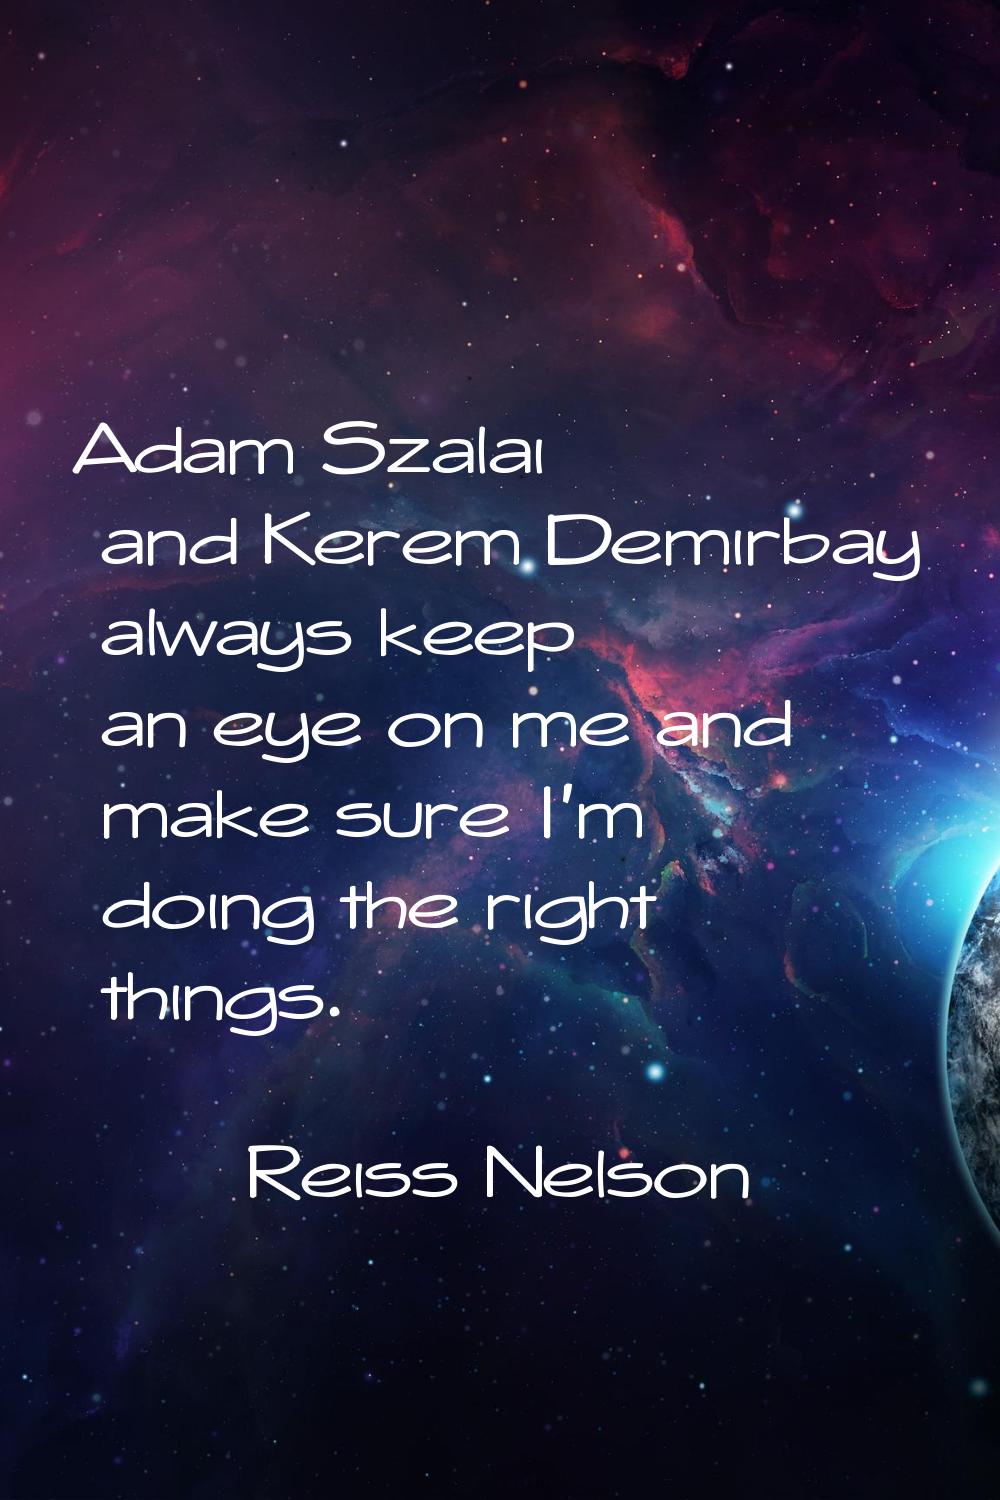 Adam Szalai and Kerem Demirbay always keep an eye on me and make sure I'm doing the right things.